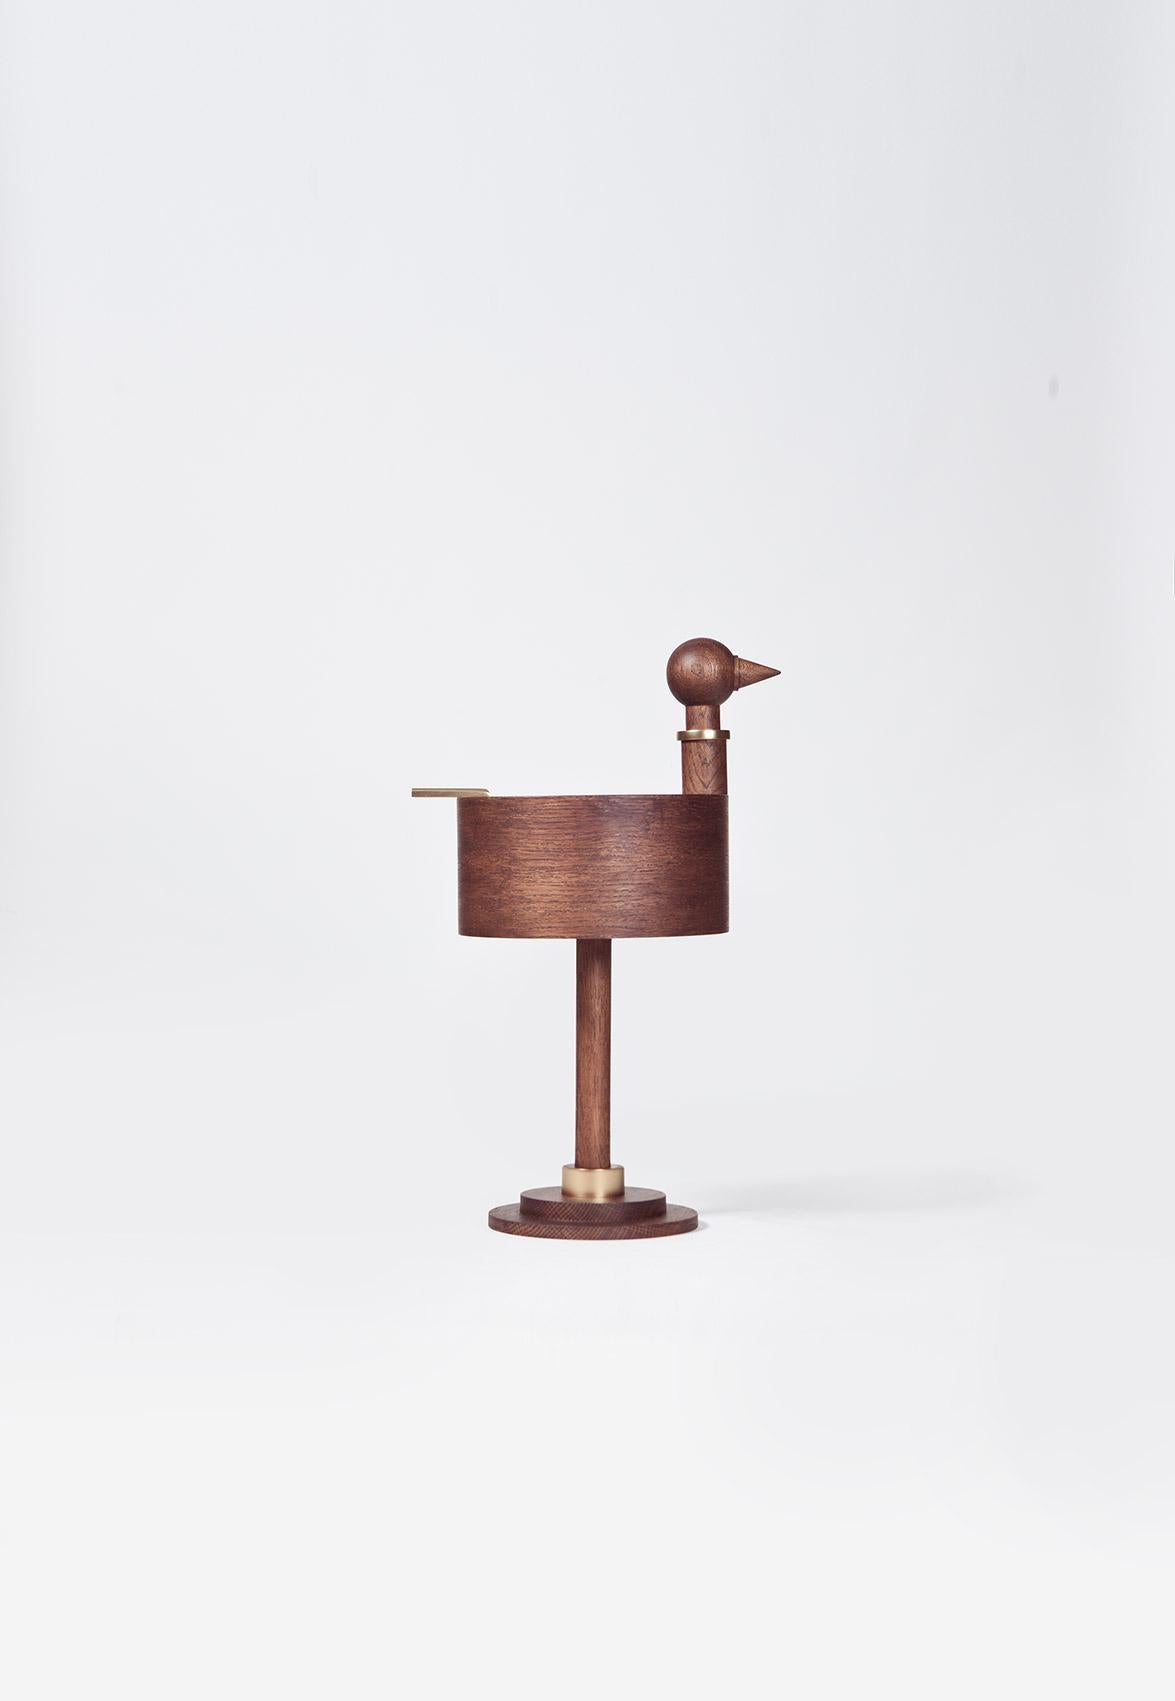 Rara Avis medium side table by Editiio
Limited edition of 24 pieces, numbered
Materials: French oak and 24k gold plated steel
Dimensions: D 30 x H 64 cm

Rara Avis is the result of a dialogue between art and design. Miquel Aparici and Mermelada